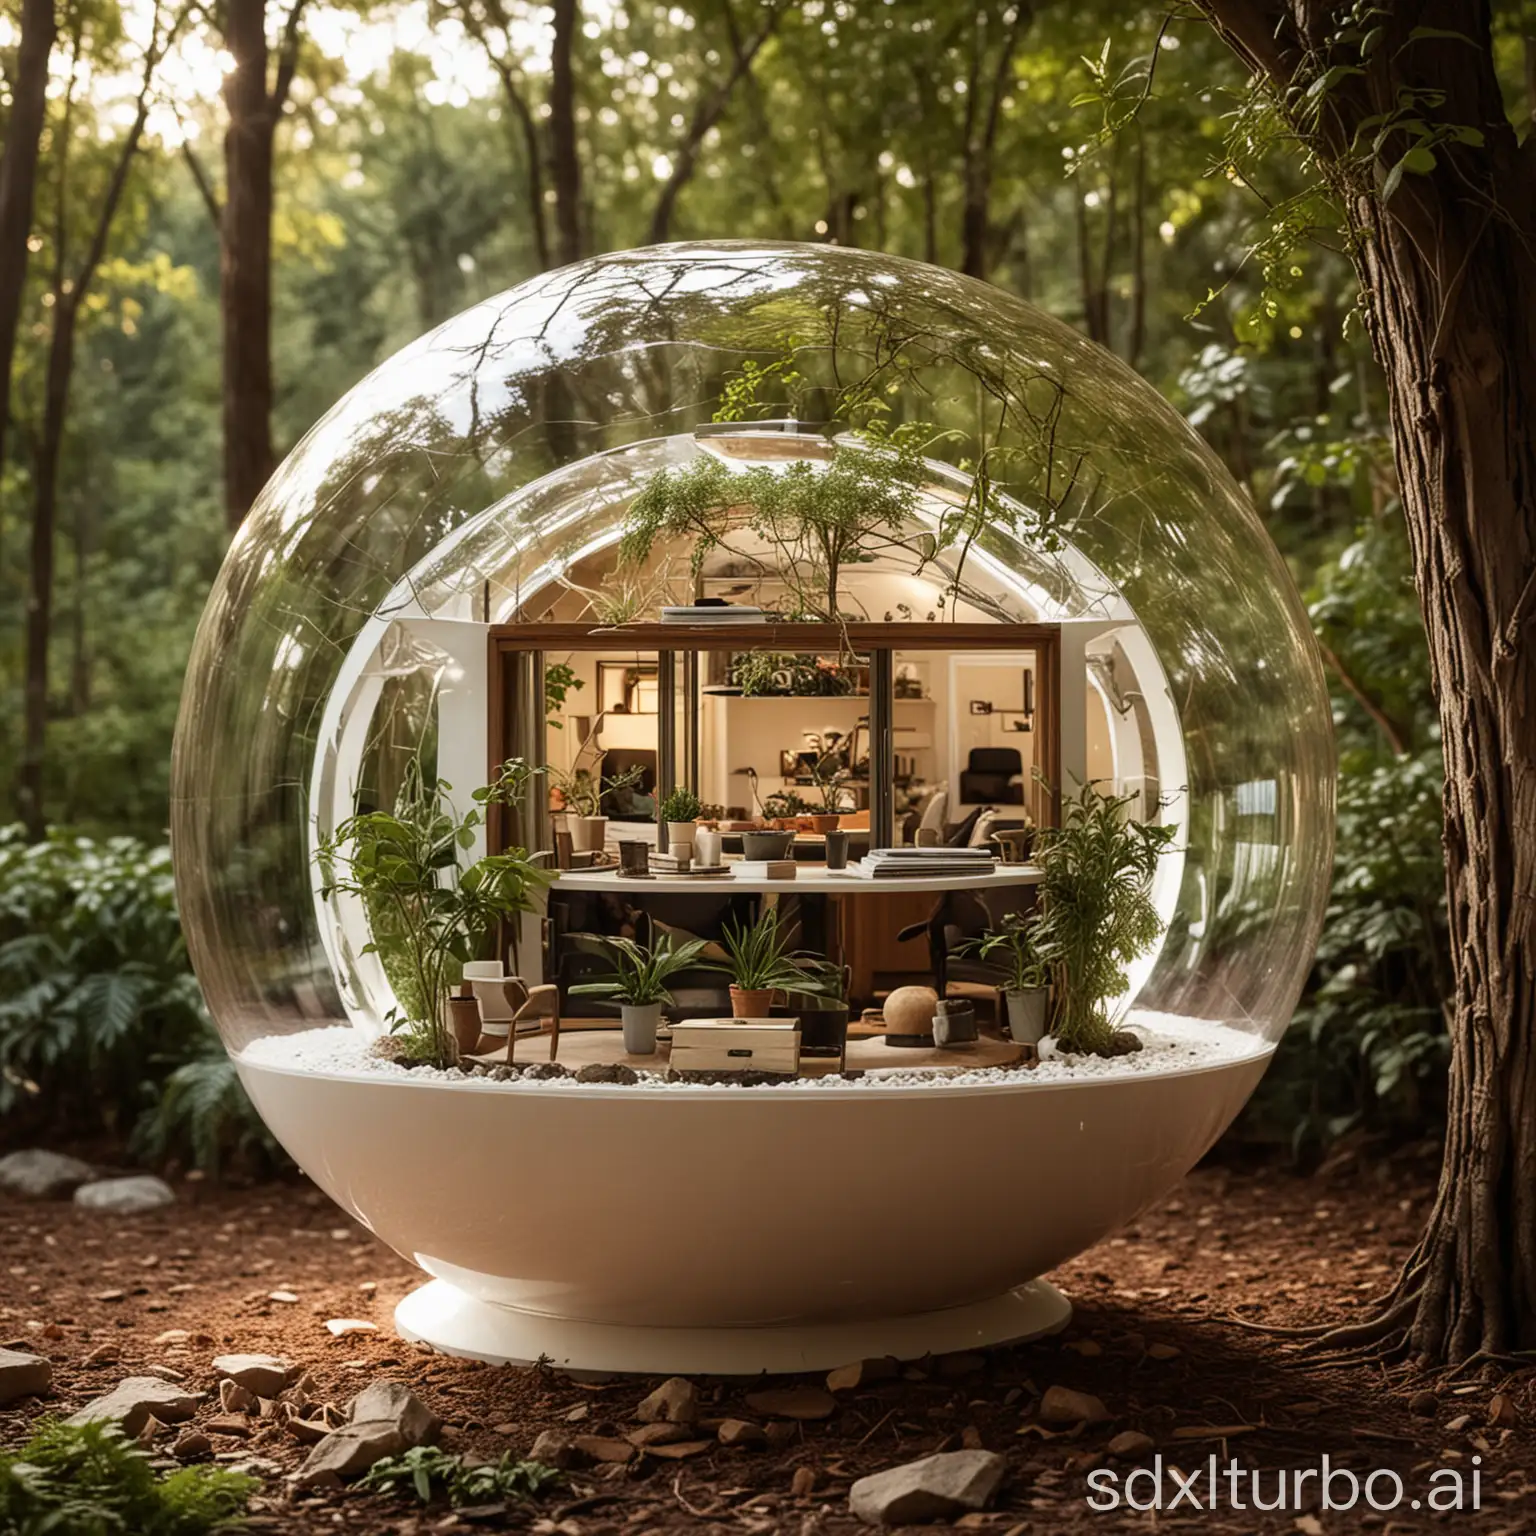 Smart-EcoFriendly-Home-Sphere-in-EcoSphere-Futuristic-Sustainable-Living